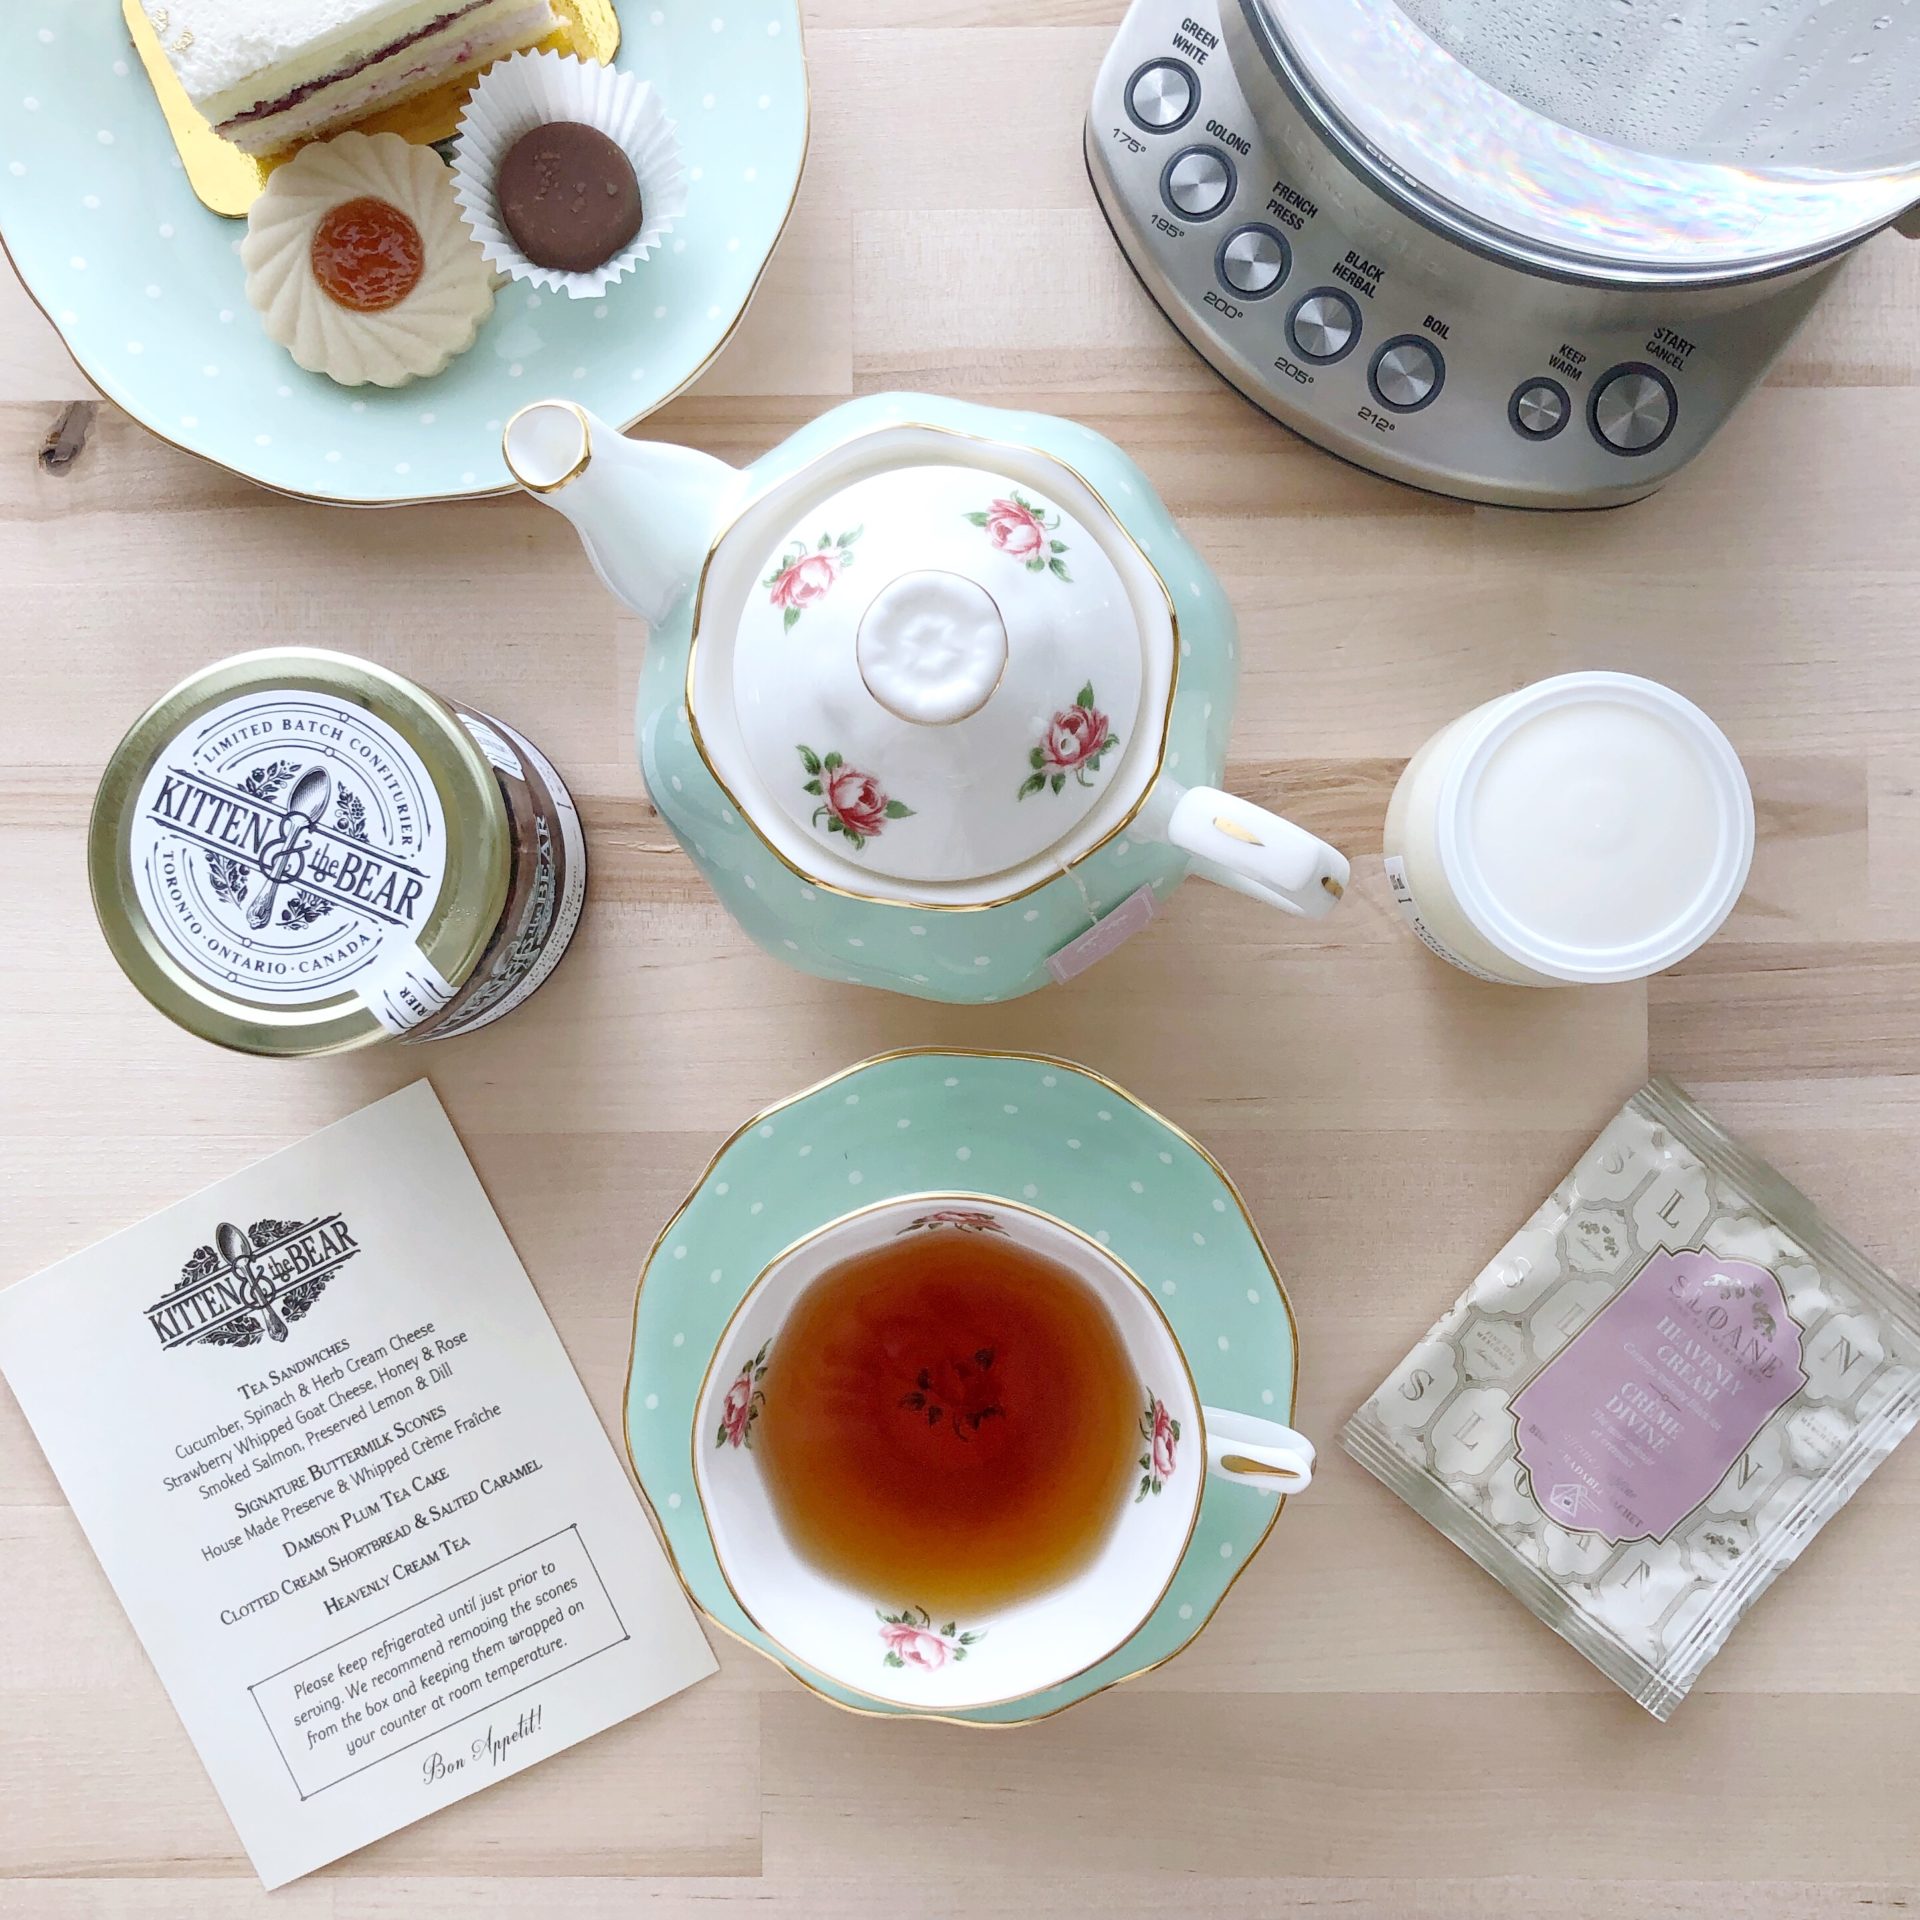 Kitten and the Bear's Afternoon Tea One (ft. Sloane Fine Tea Heavenly Cream) | Tea Review - in Spoons